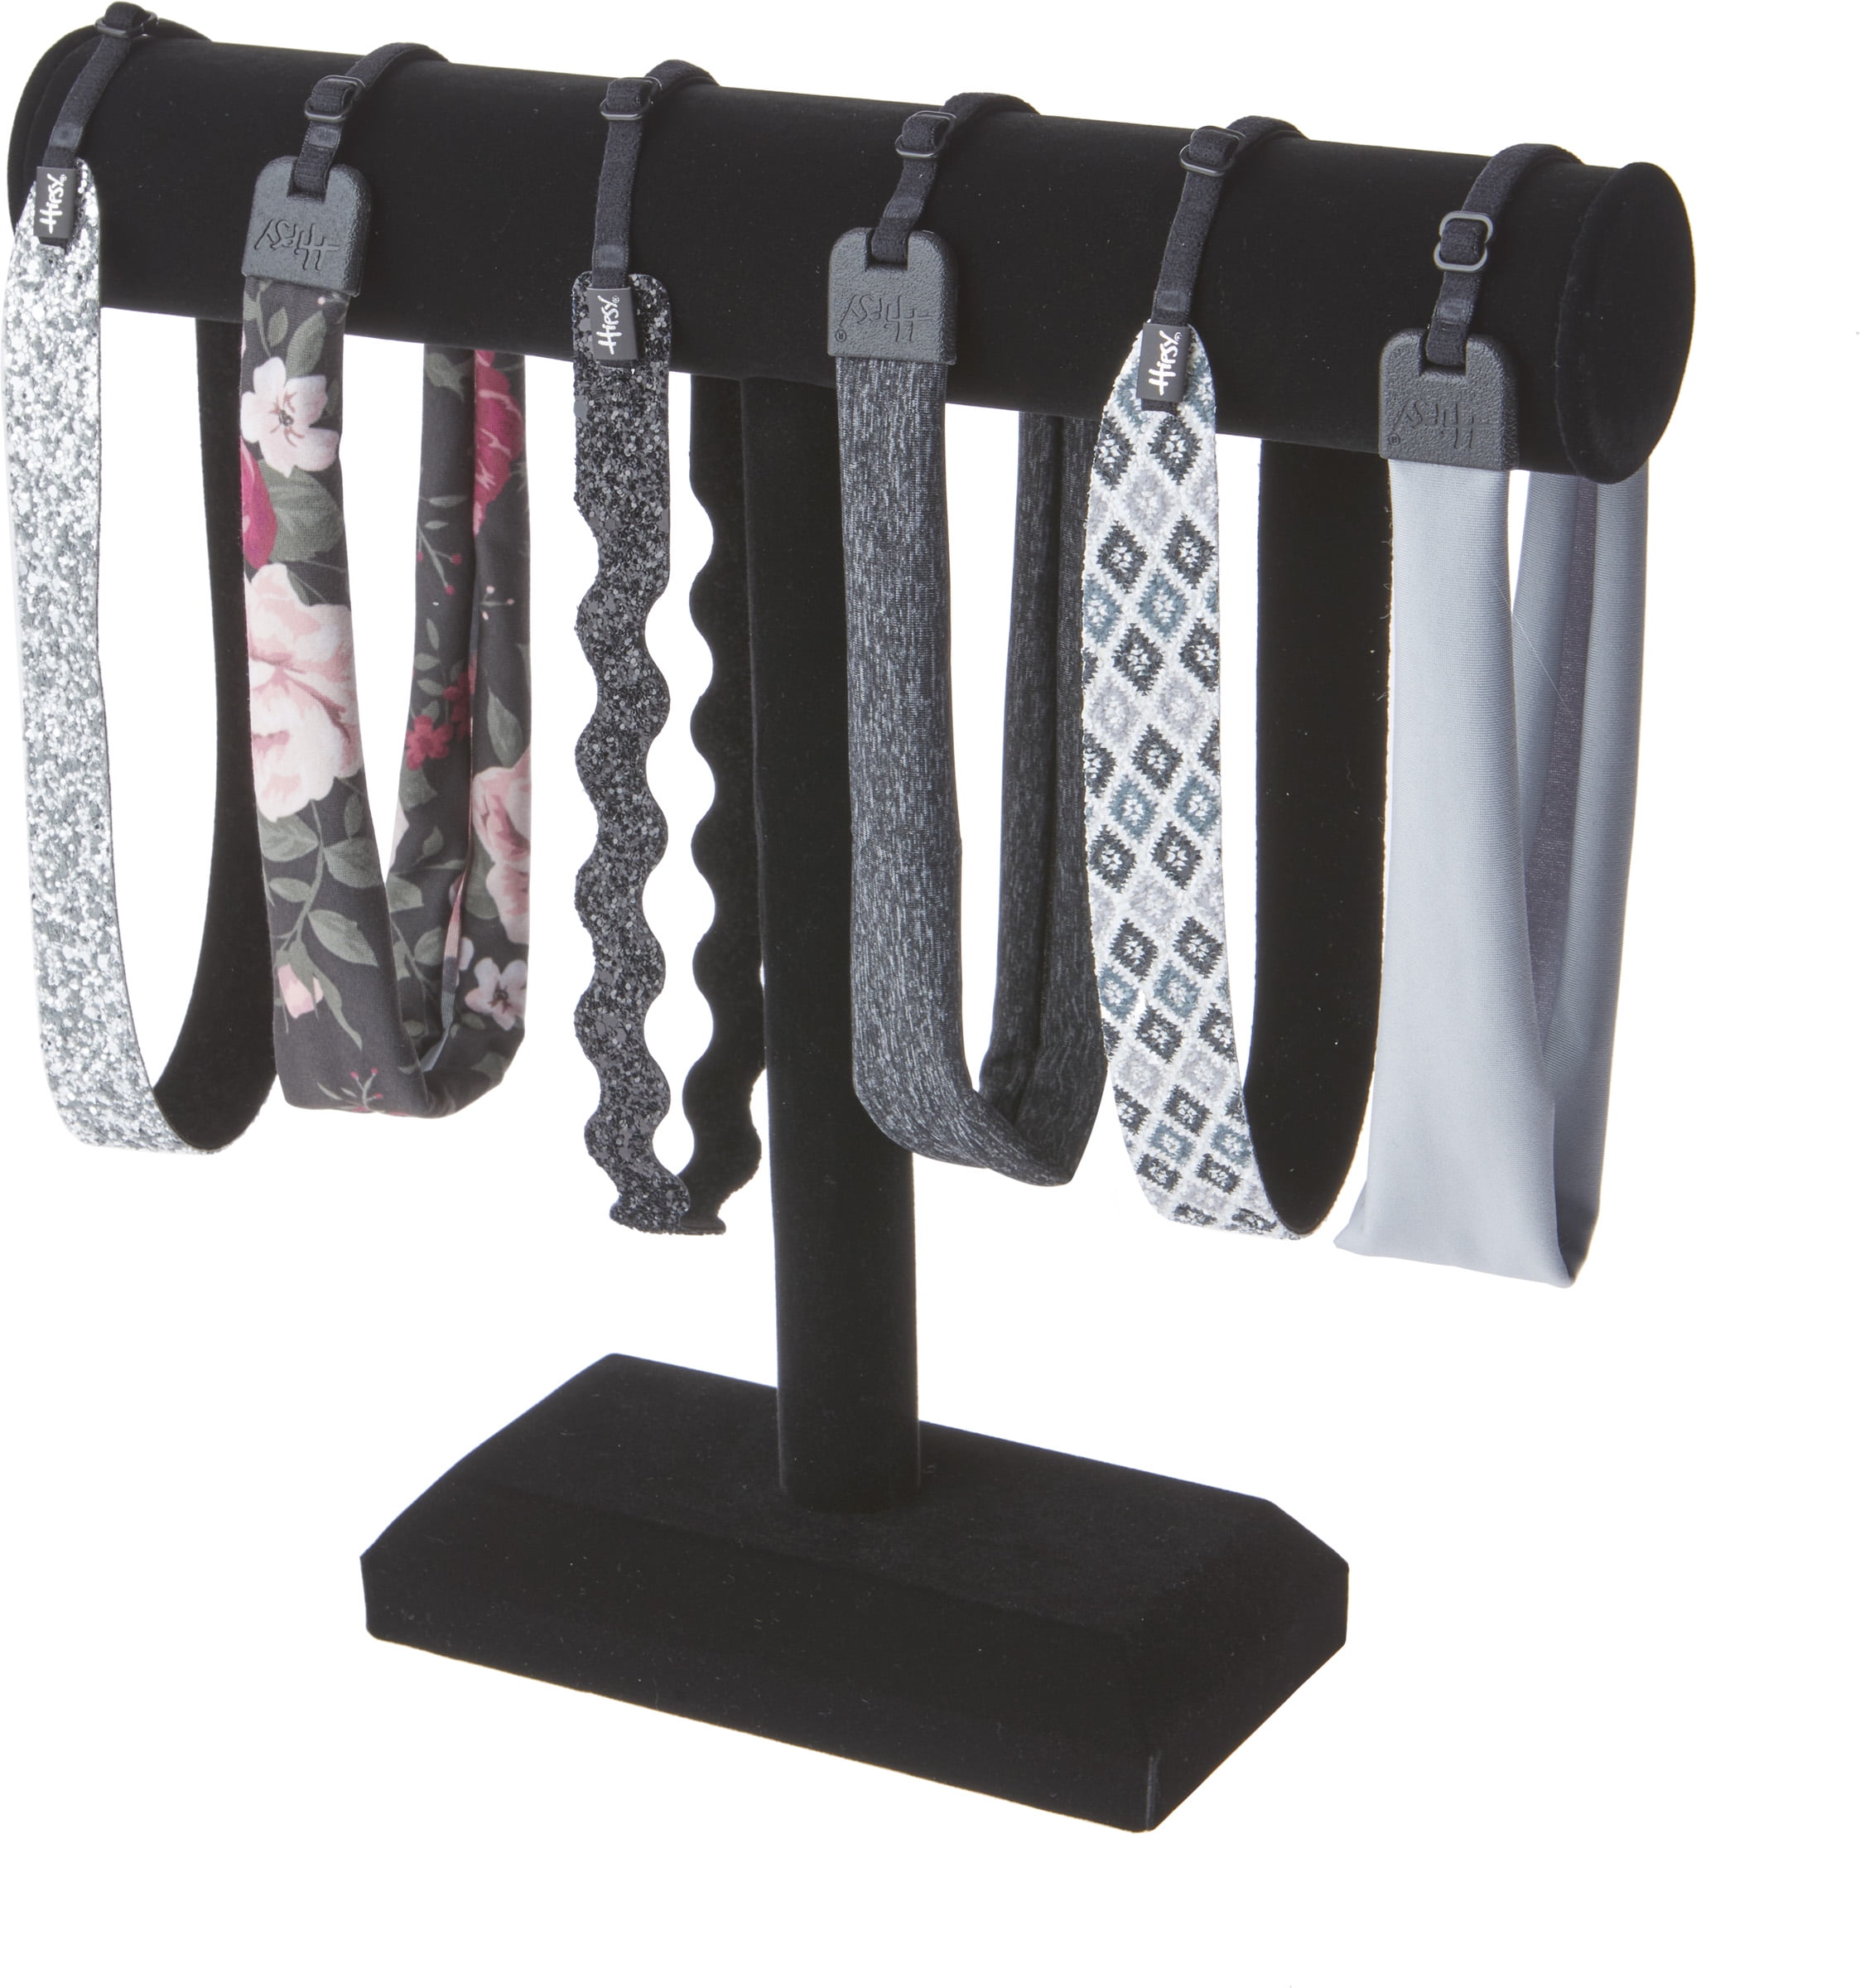 12" W x 12" H Details about   Plymor Black Velvet T-Bar Necklace Display Stand Pack of 3 